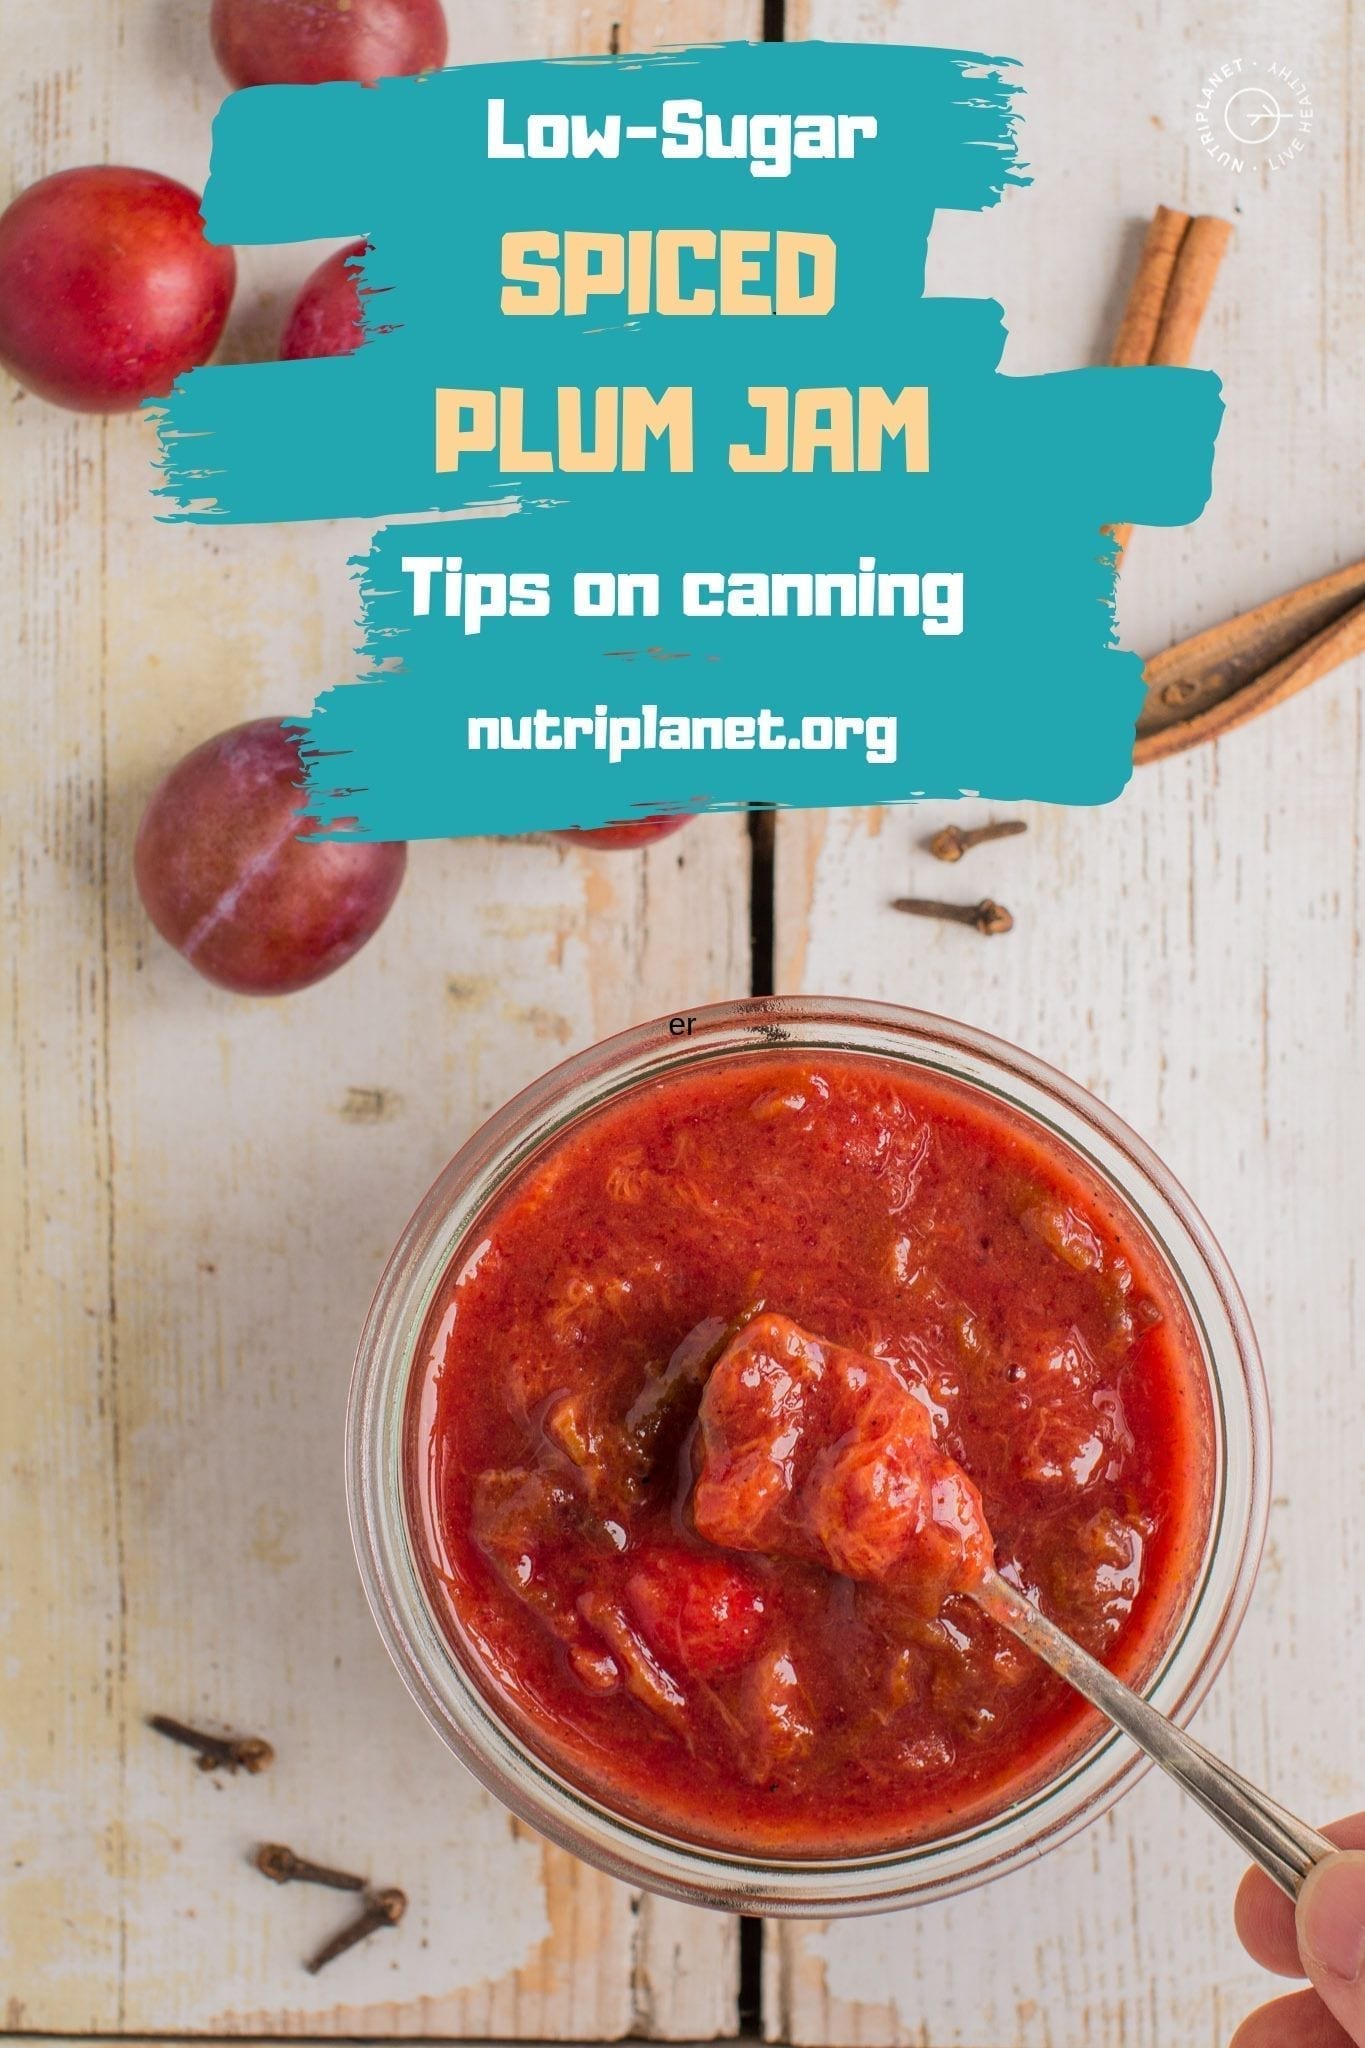 Spiced low-sugar plum jam for canning that will make a perfect spread for toast or topping for porridges, pancakes and waffles.